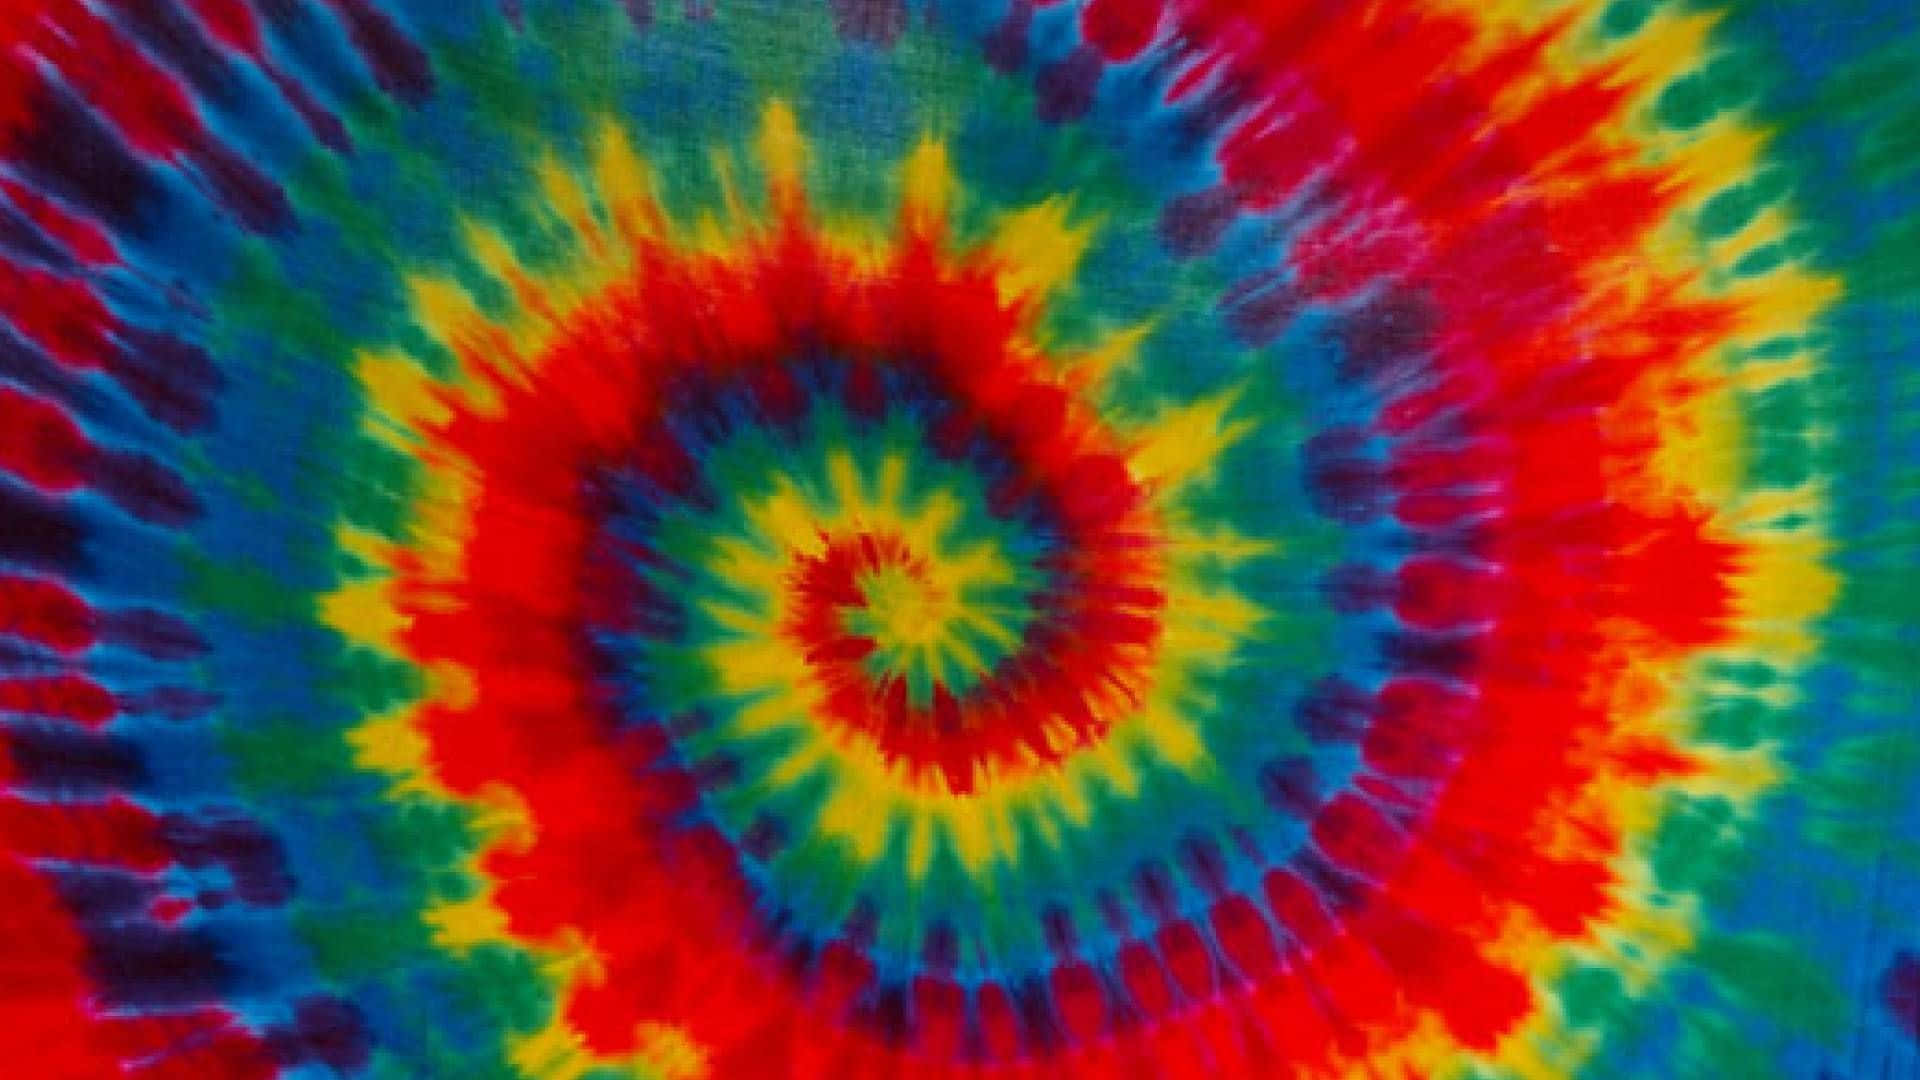 Bright and Colorful Tie Dye Patterns